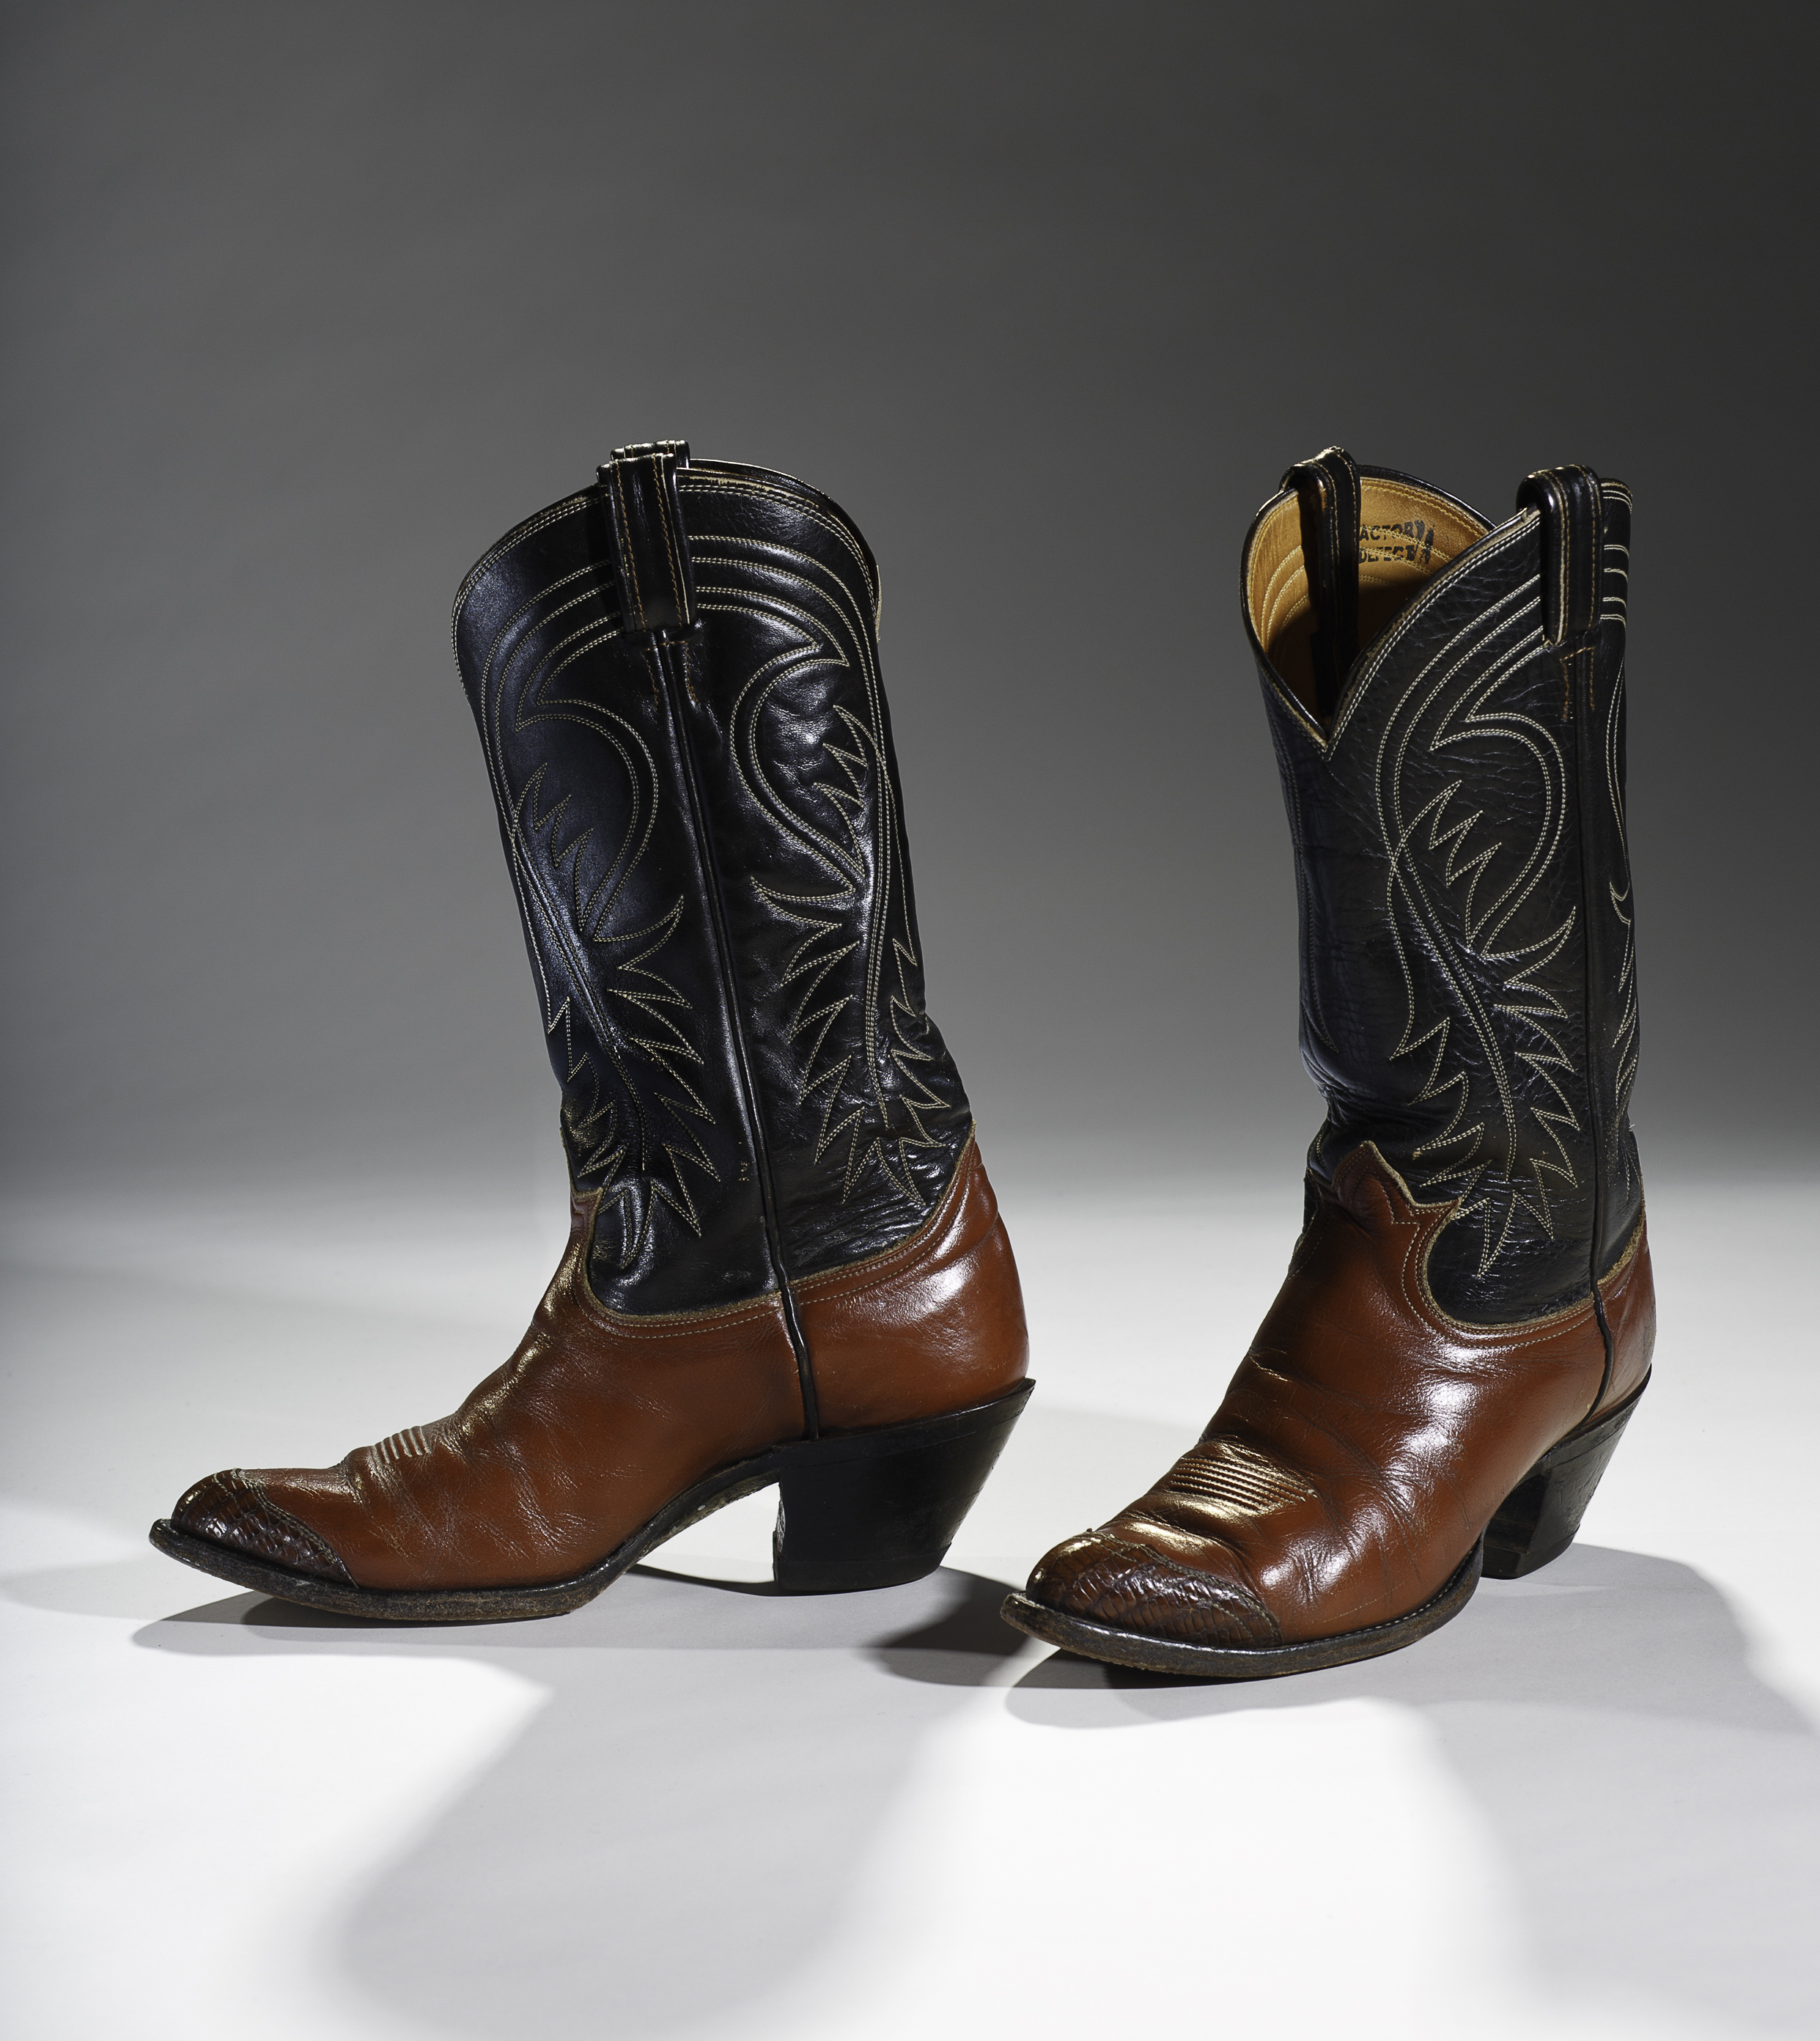 From dime novels and Wild West shows to Hollywood Westerns, the high-heeled cowboy symbolized unfettered freedoms and self-reliance in the 20th century. Although 19th century cowboys first splurged on ostentatious cowboy boots after reaching the railheads at the end of a long cattle drive, it took Hollywood and dude ranches for the cowboy boot with its pointy toe and low slung heel to finally take shape. This pair of Tony Lama boots reflects the fashion for finery from the use of lizard skin at the toe to the high-stacked leather heel. Collection of the Bata Shoe Museum. Photo credit: Image © 2015 Bata Shoe Museum, Toronto, Canada (photo: Ron Wood) 